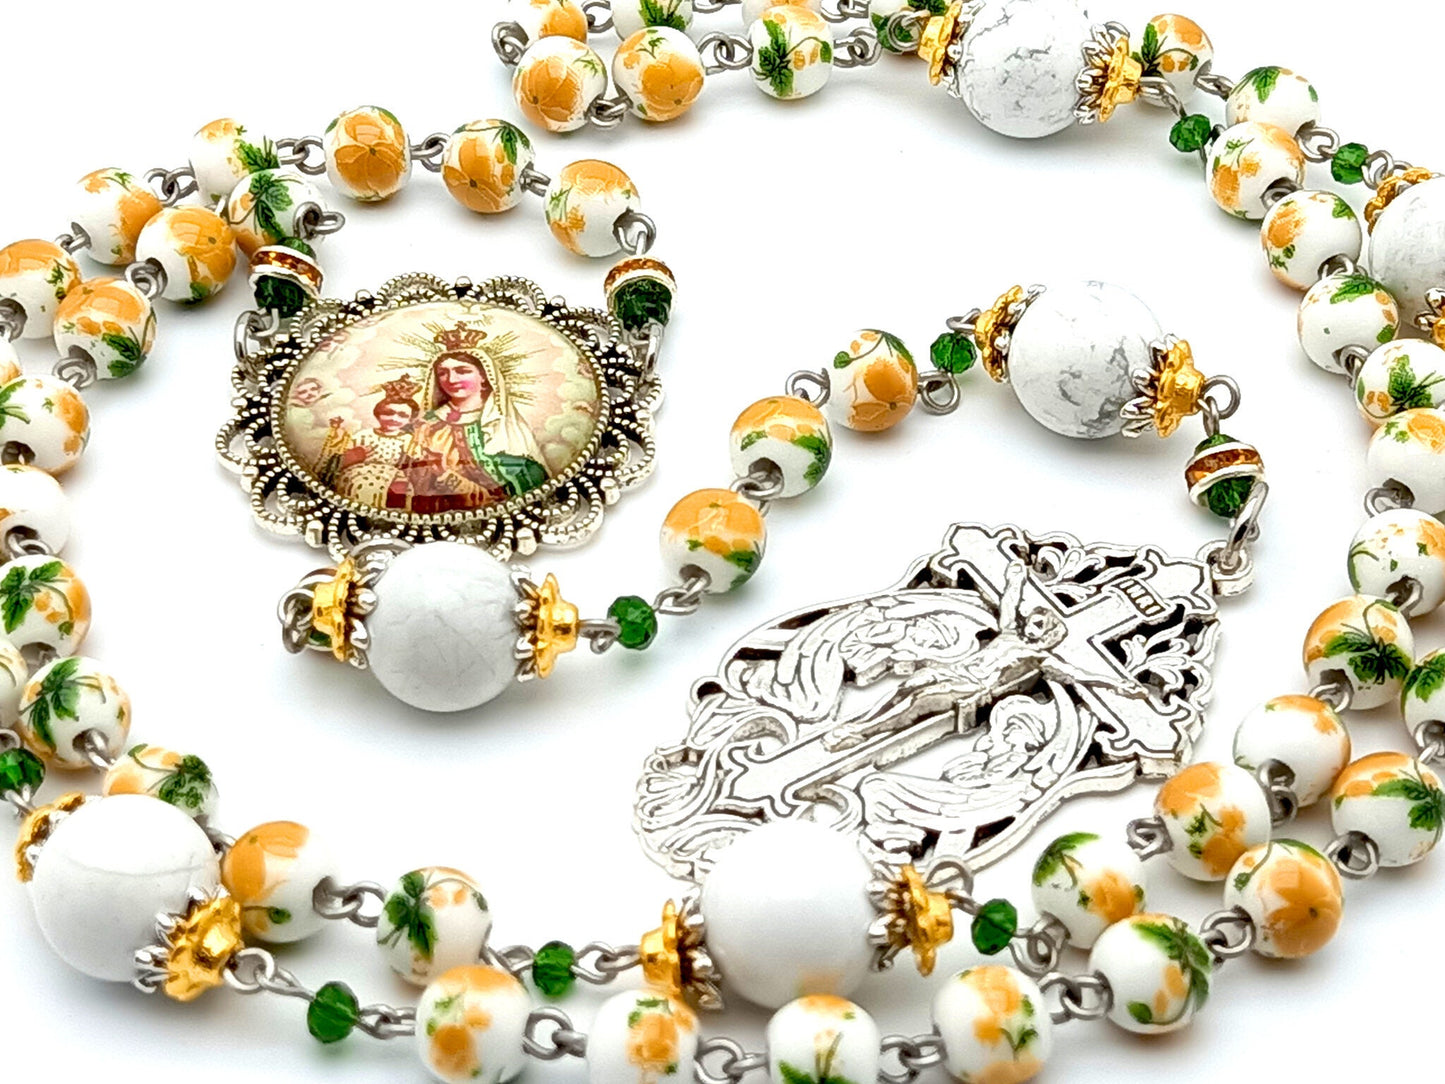 Our Lady of Mount Carmel unique rosary beads with floral porcelain and white howlite gemstone beads, silver angel crucifix and picture centre medal.